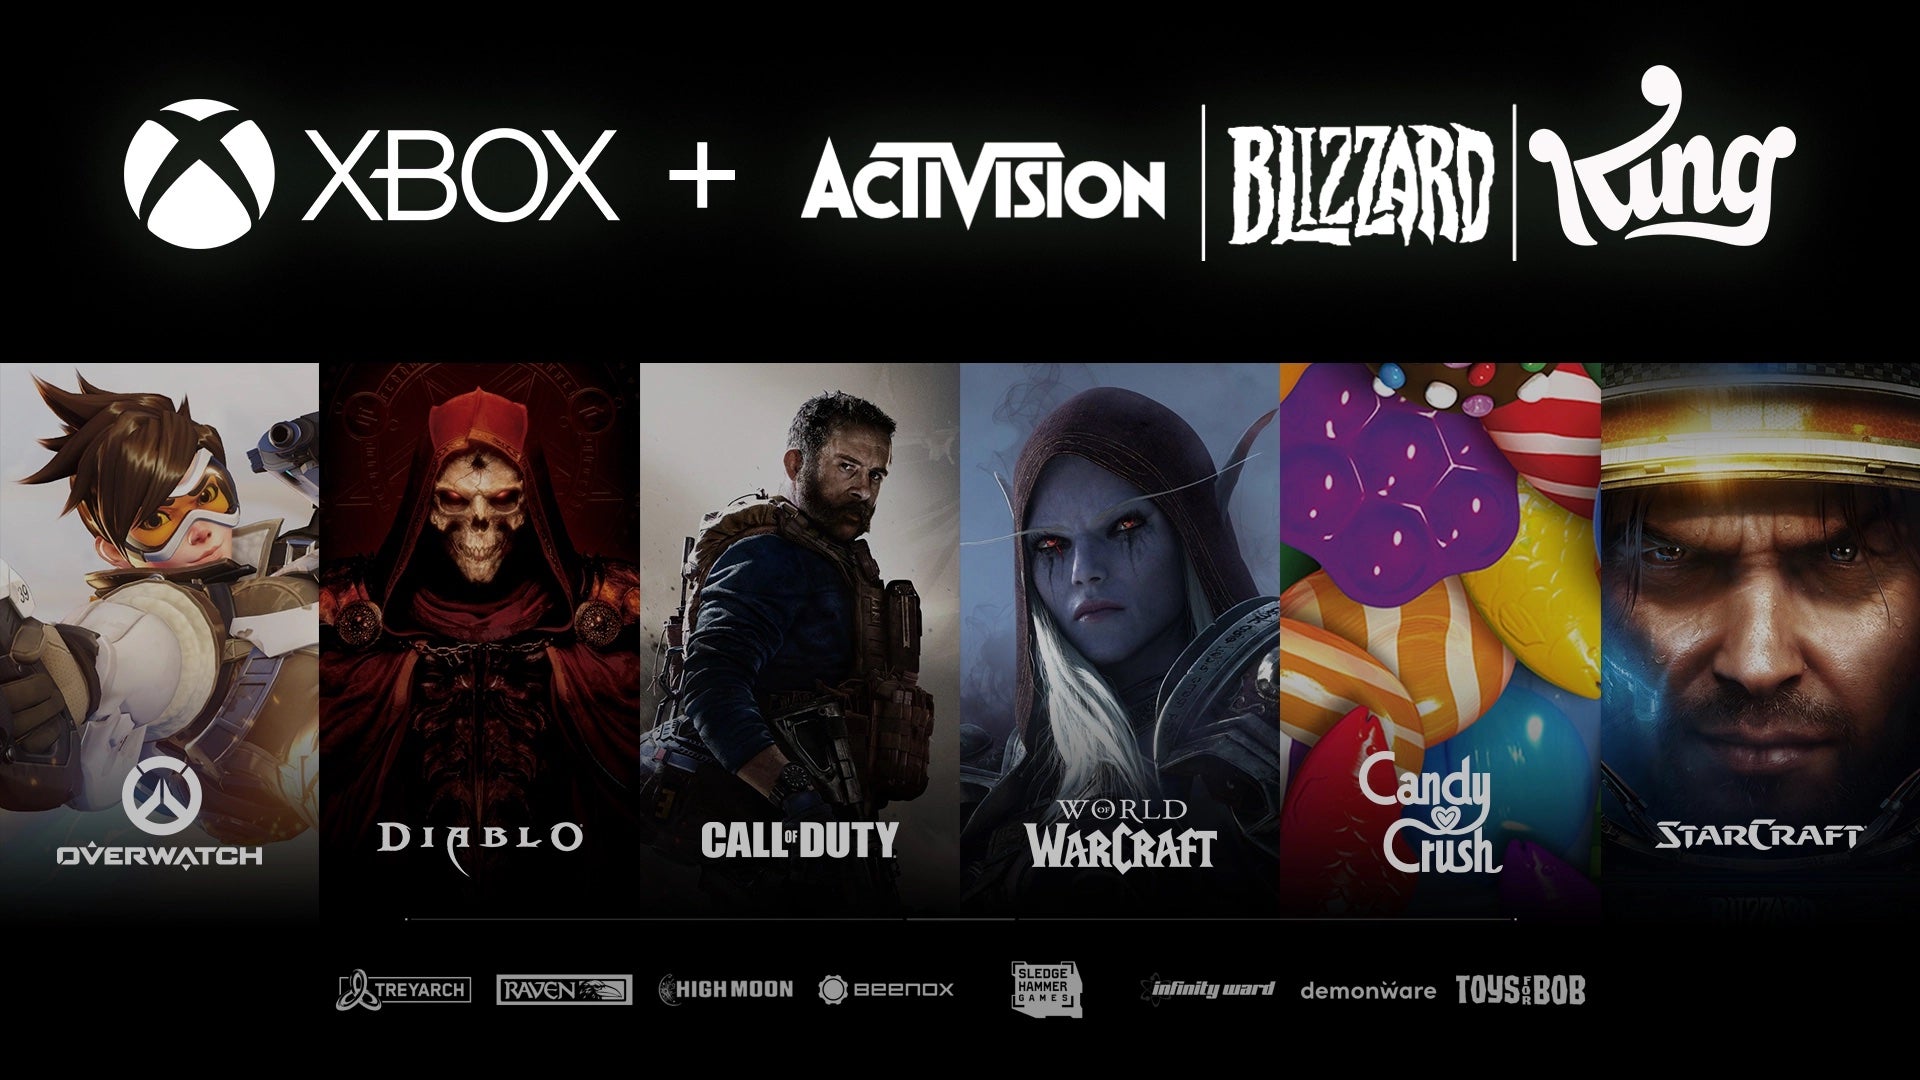 Image for Microsoft wants "the right people in the right position" when it takes over Activision Blizzard